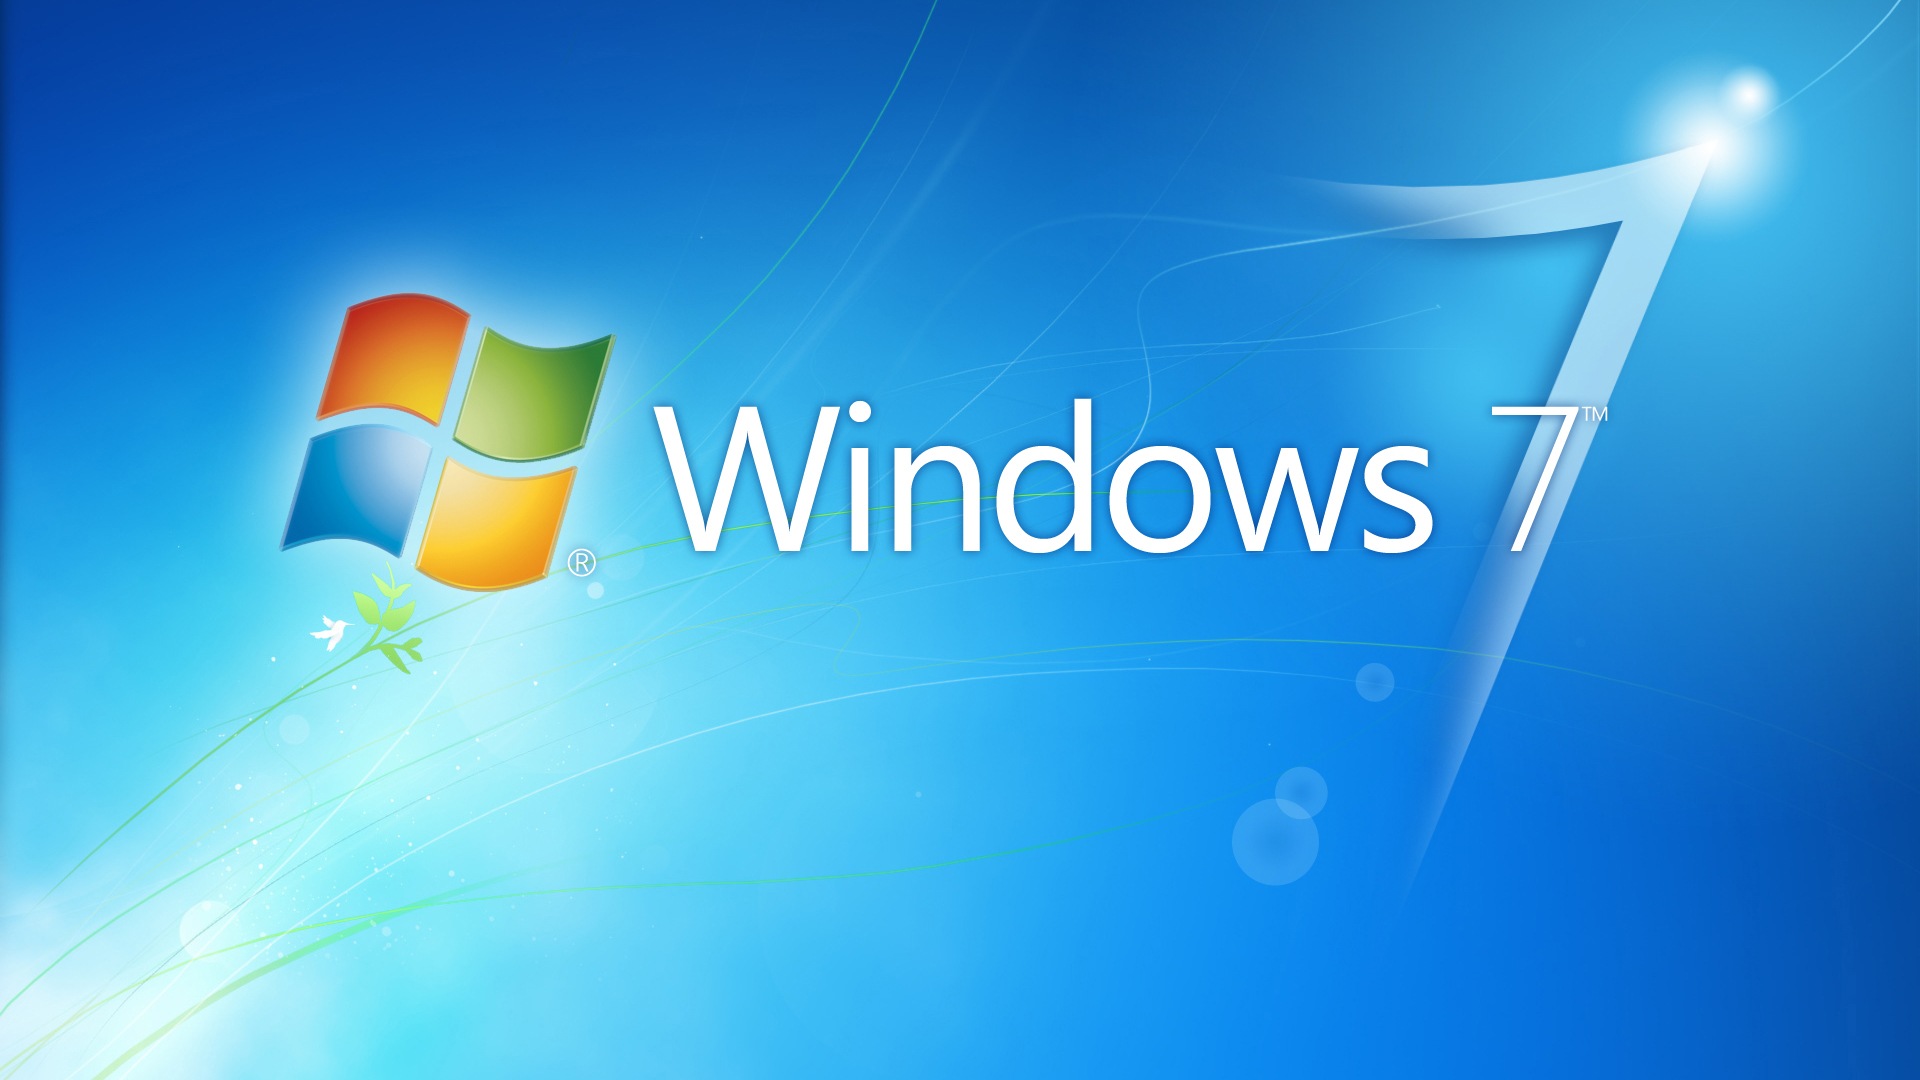 How to Uninstall Troublesome Programs from Windows 7